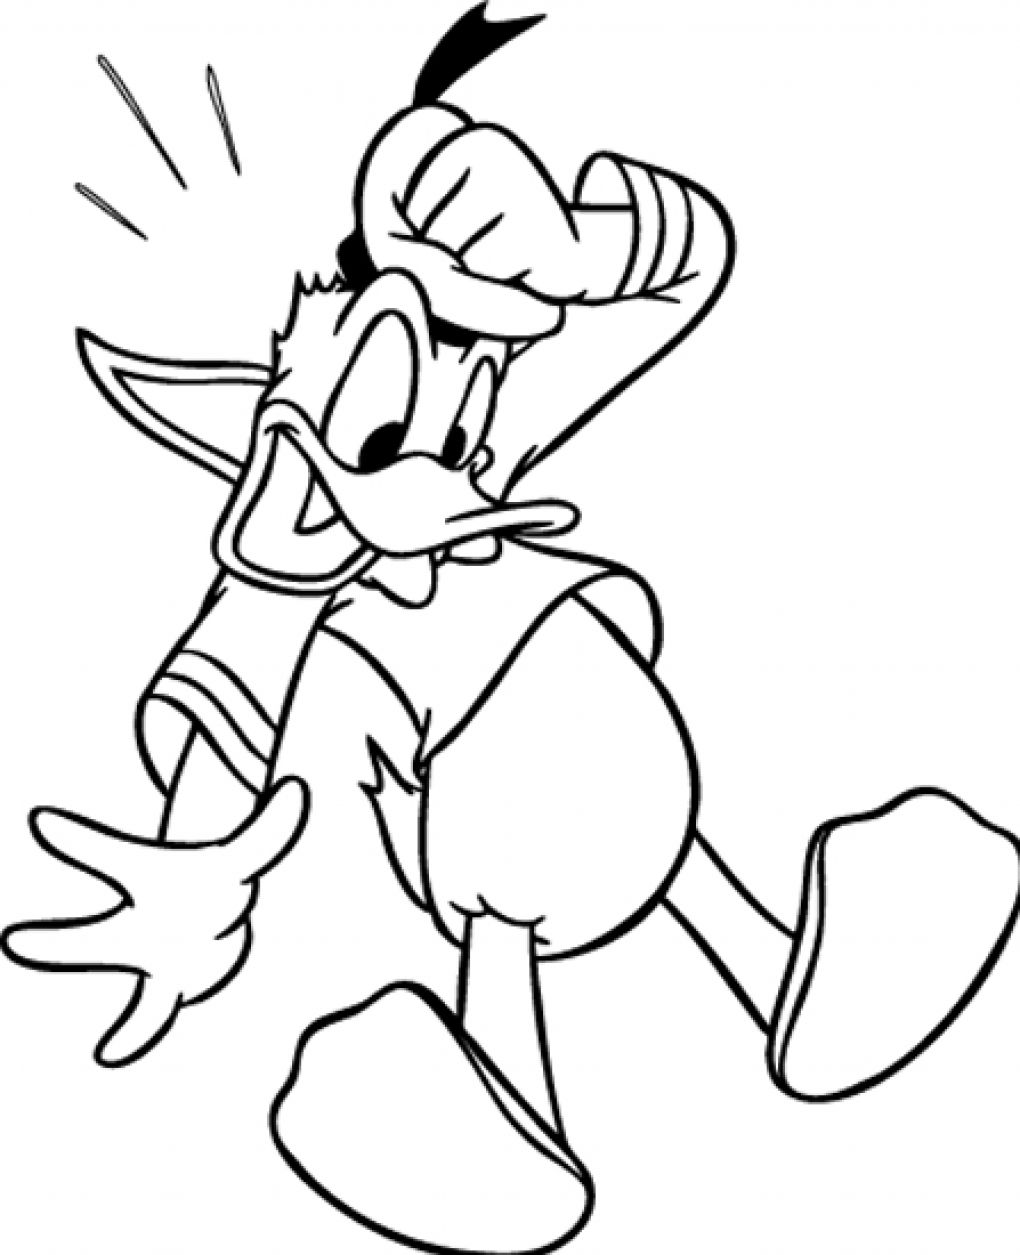 Downloadable Donald Duck Th Coloring Pages For Kids - deColoring